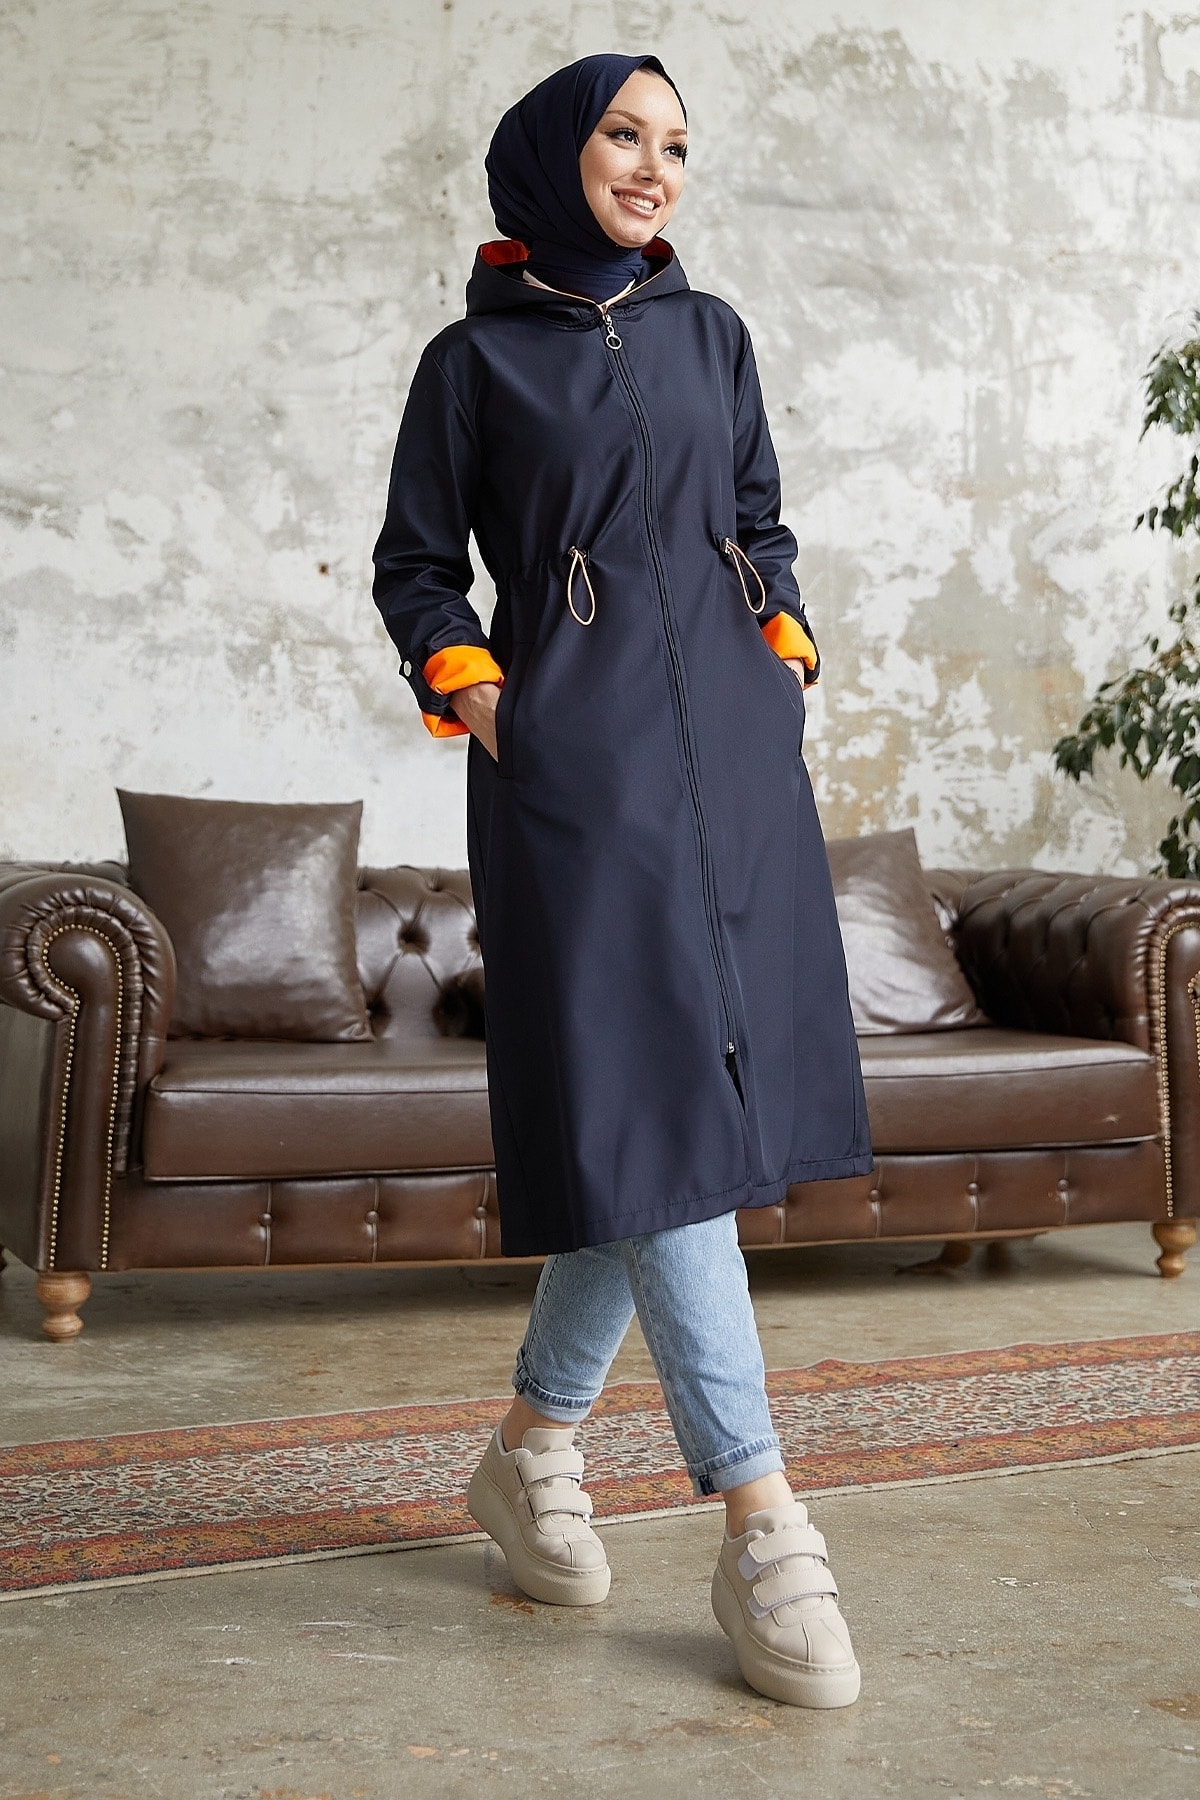 InStyle Hooded Neon Trench with Pleated Waist - Navy Blue \ Orange